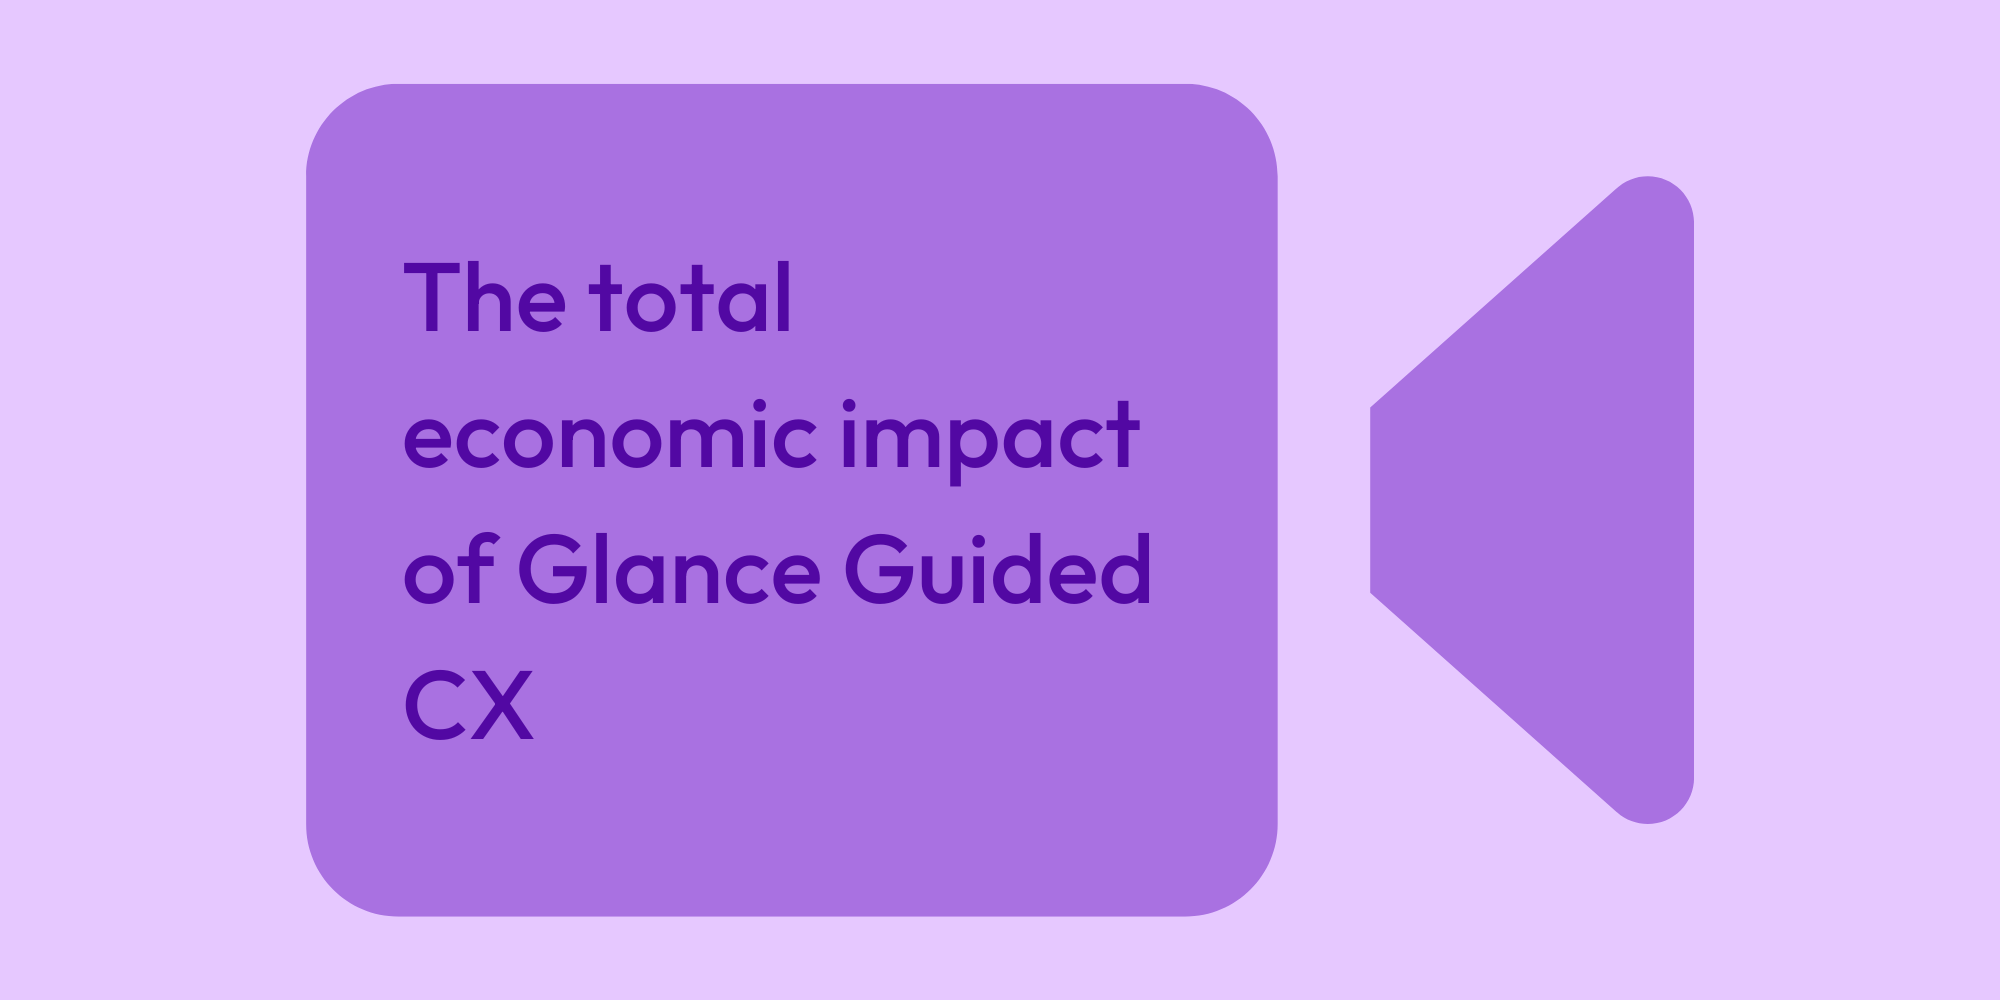 The total economic impact of Glance Guided CX